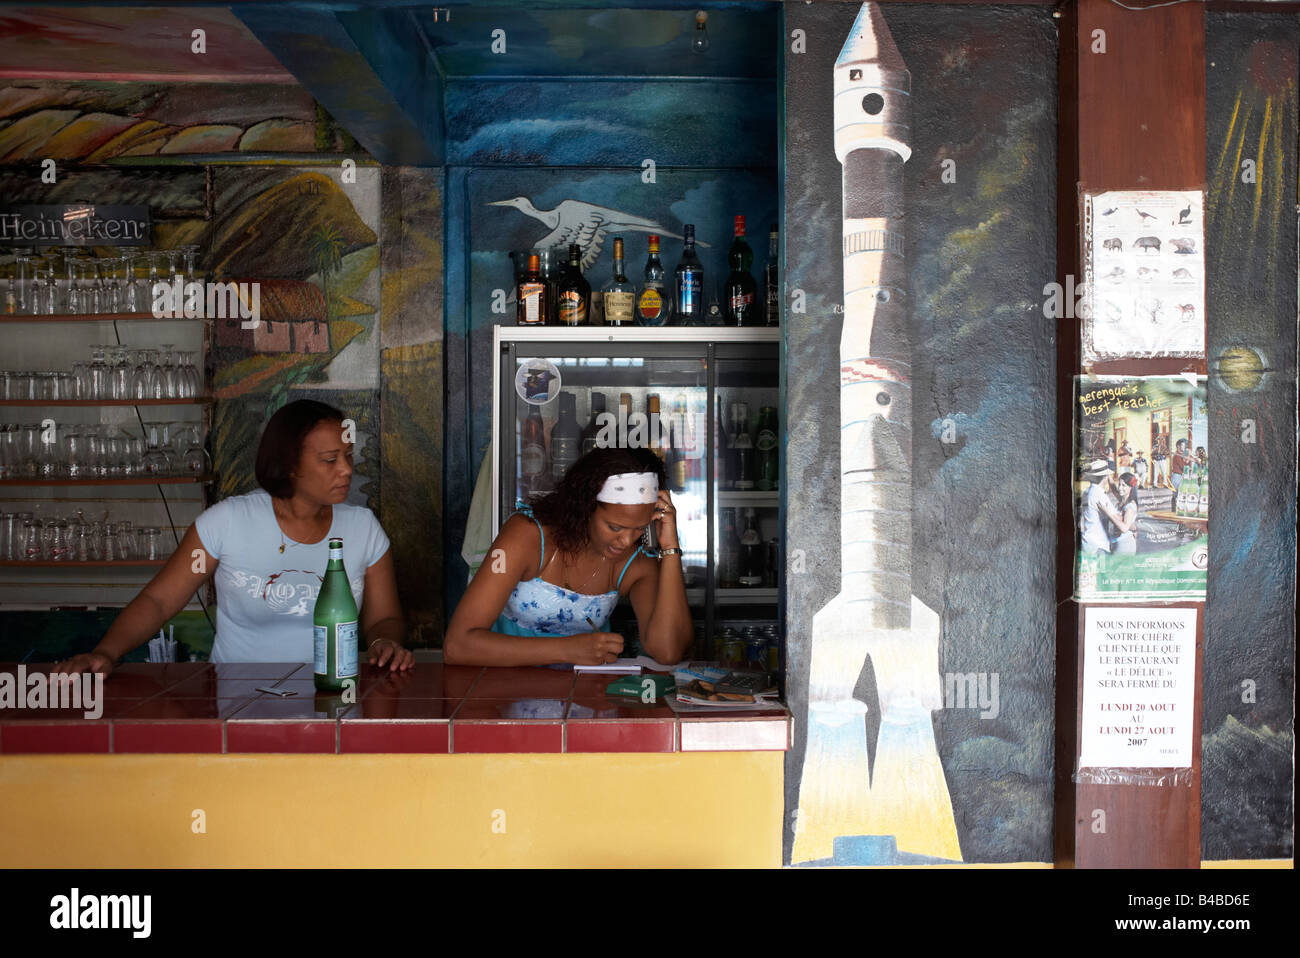 Taking telephone orders near rocket painting at the Délice restaurant in the old quarter of Kourou, French Guiana Stock Photo